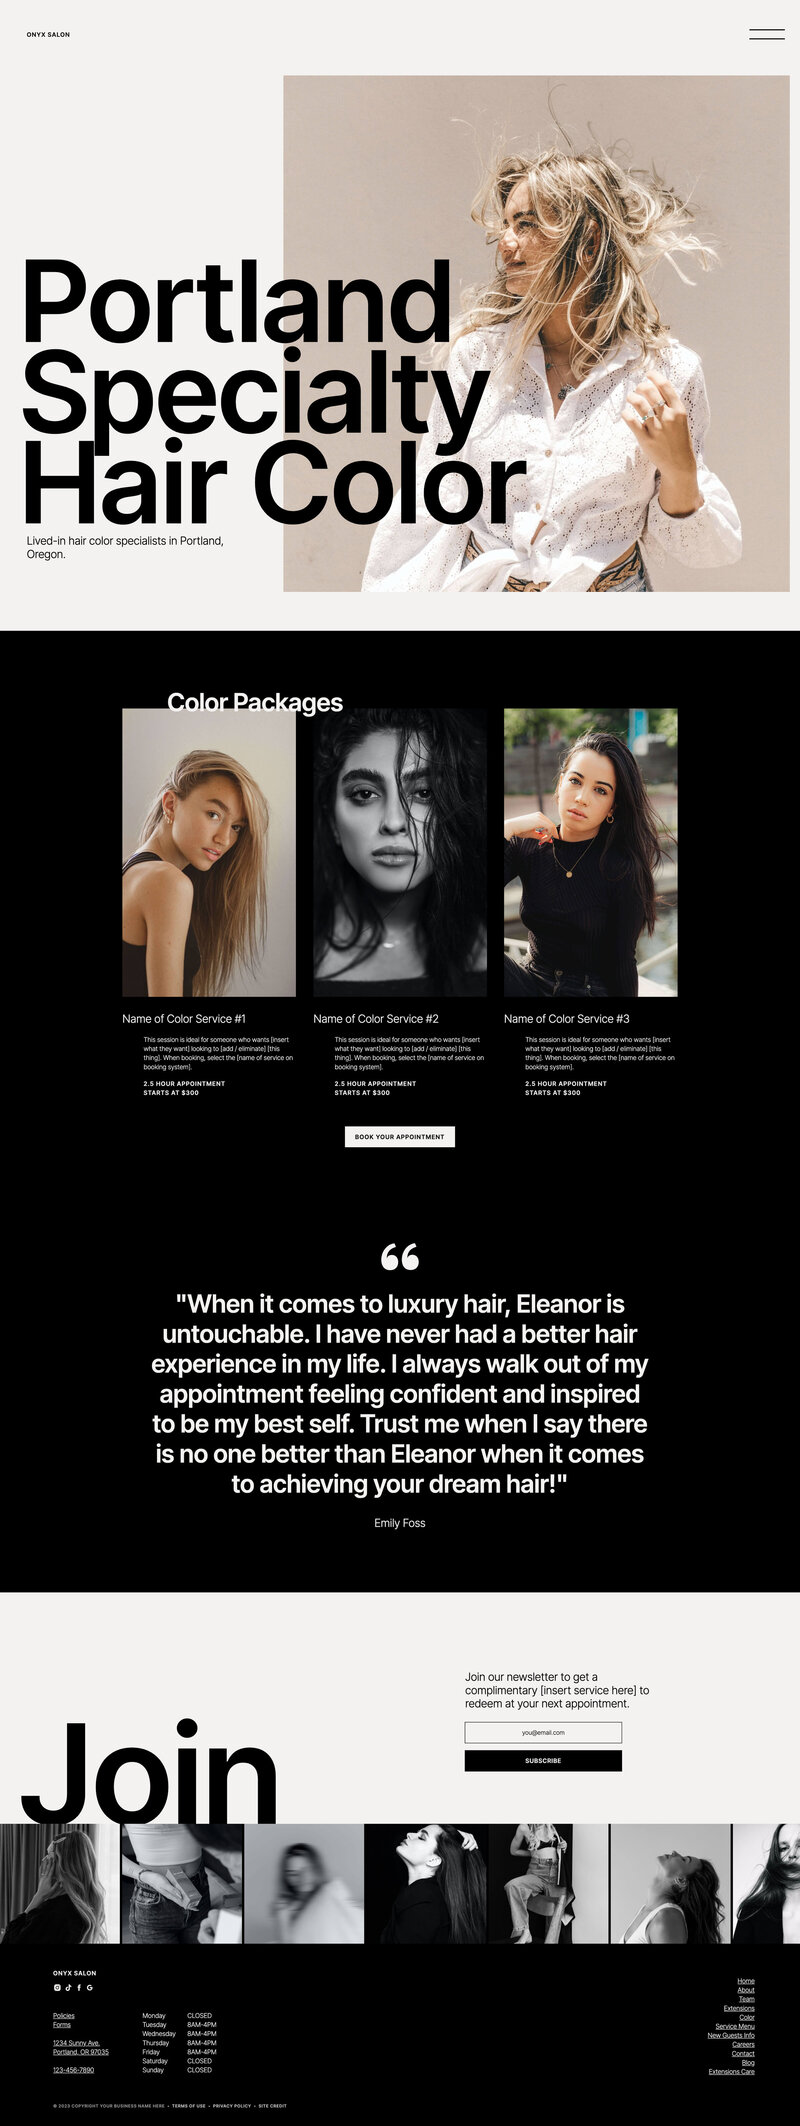 website-template-for-hair-stylists-salons-onyx-franklinandwillow-color-2023-03-28-14_38_02